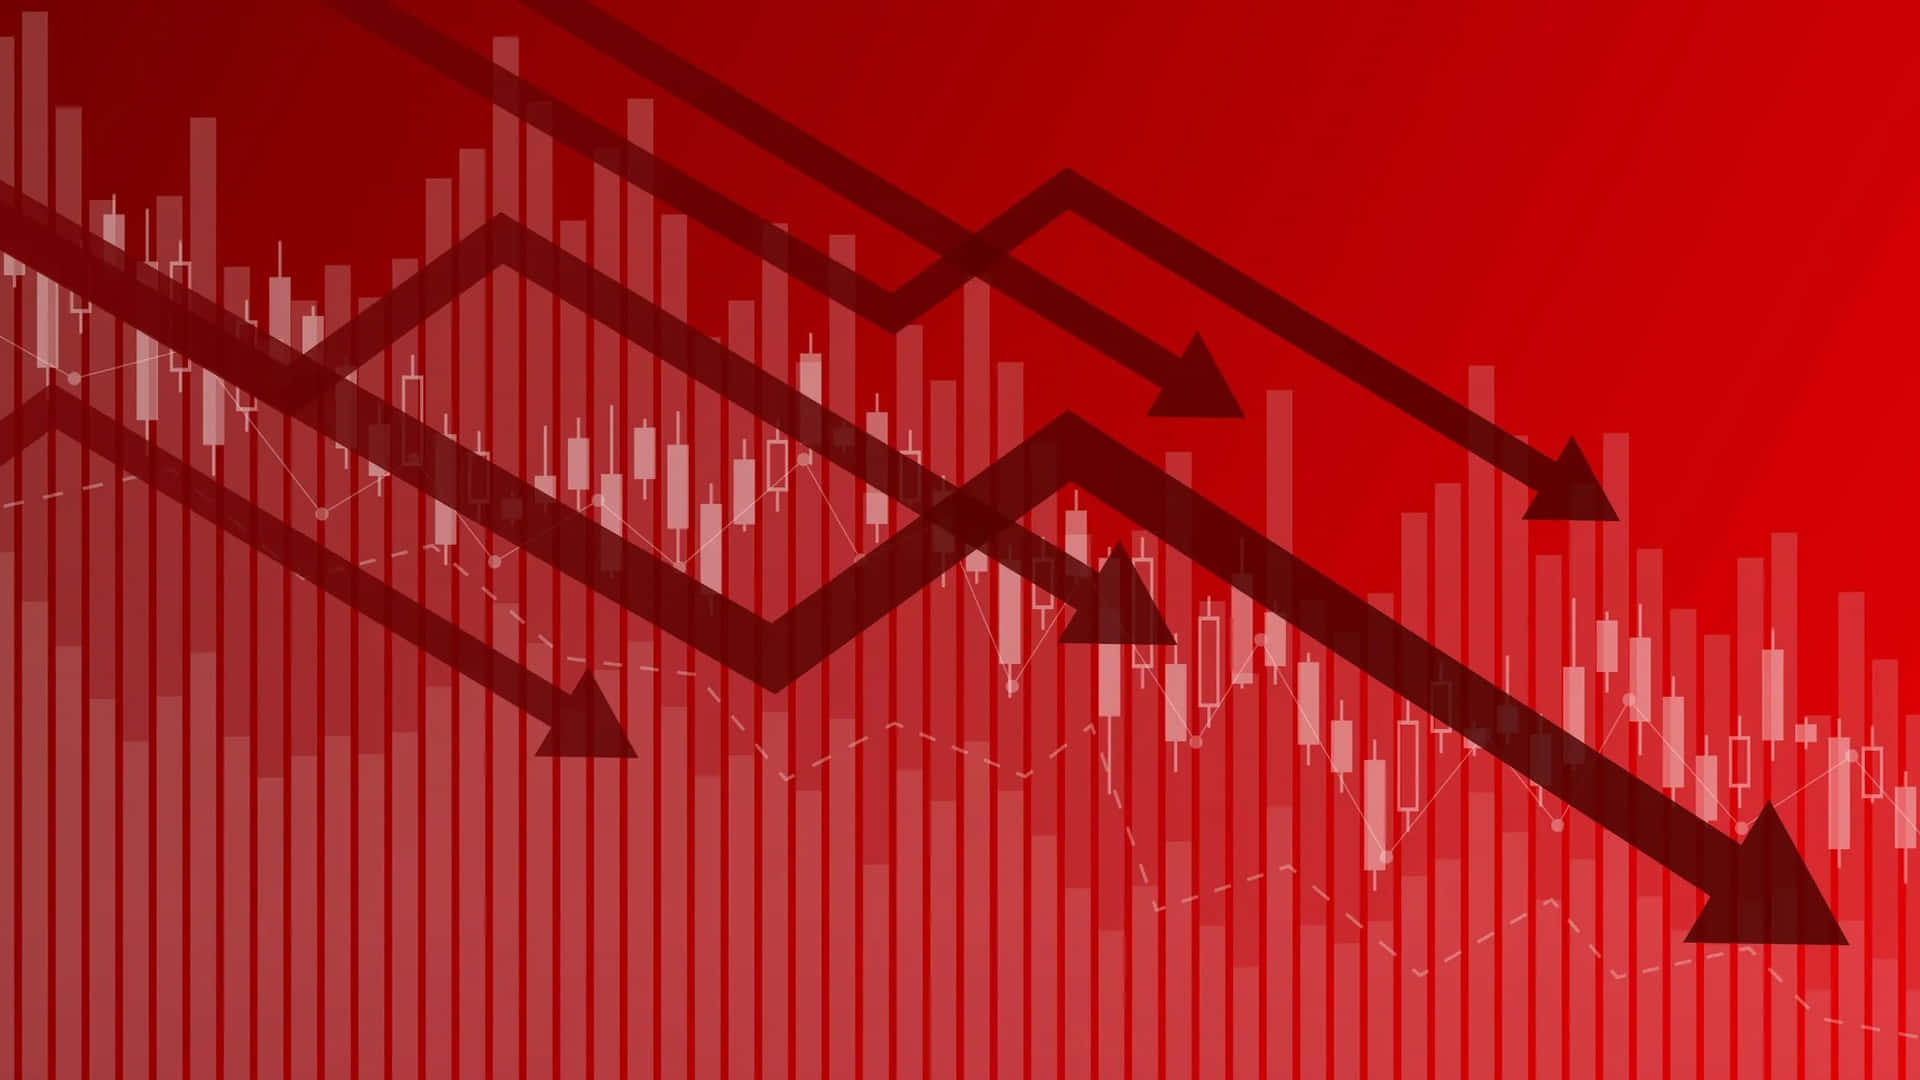 A Red Background With Arrows Pointing Down